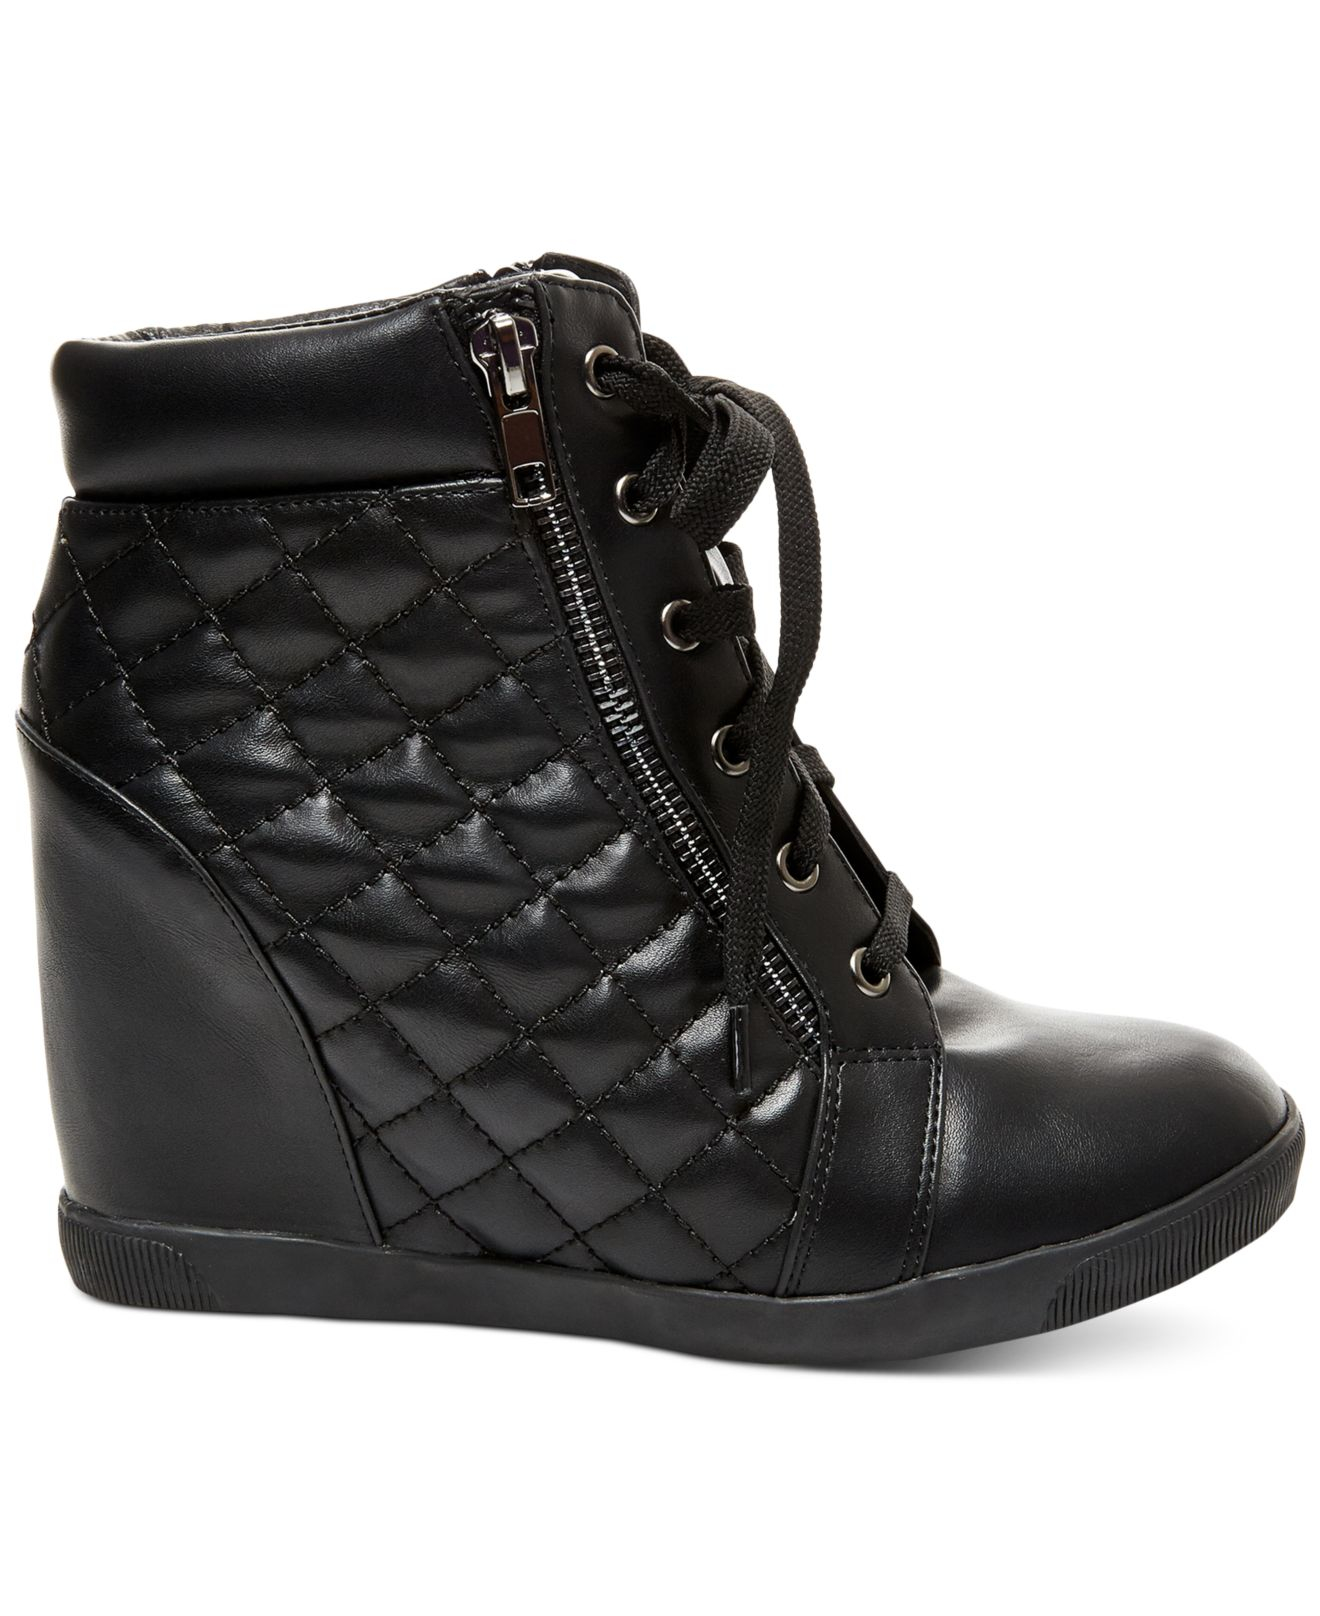 quilted wedge sneakers